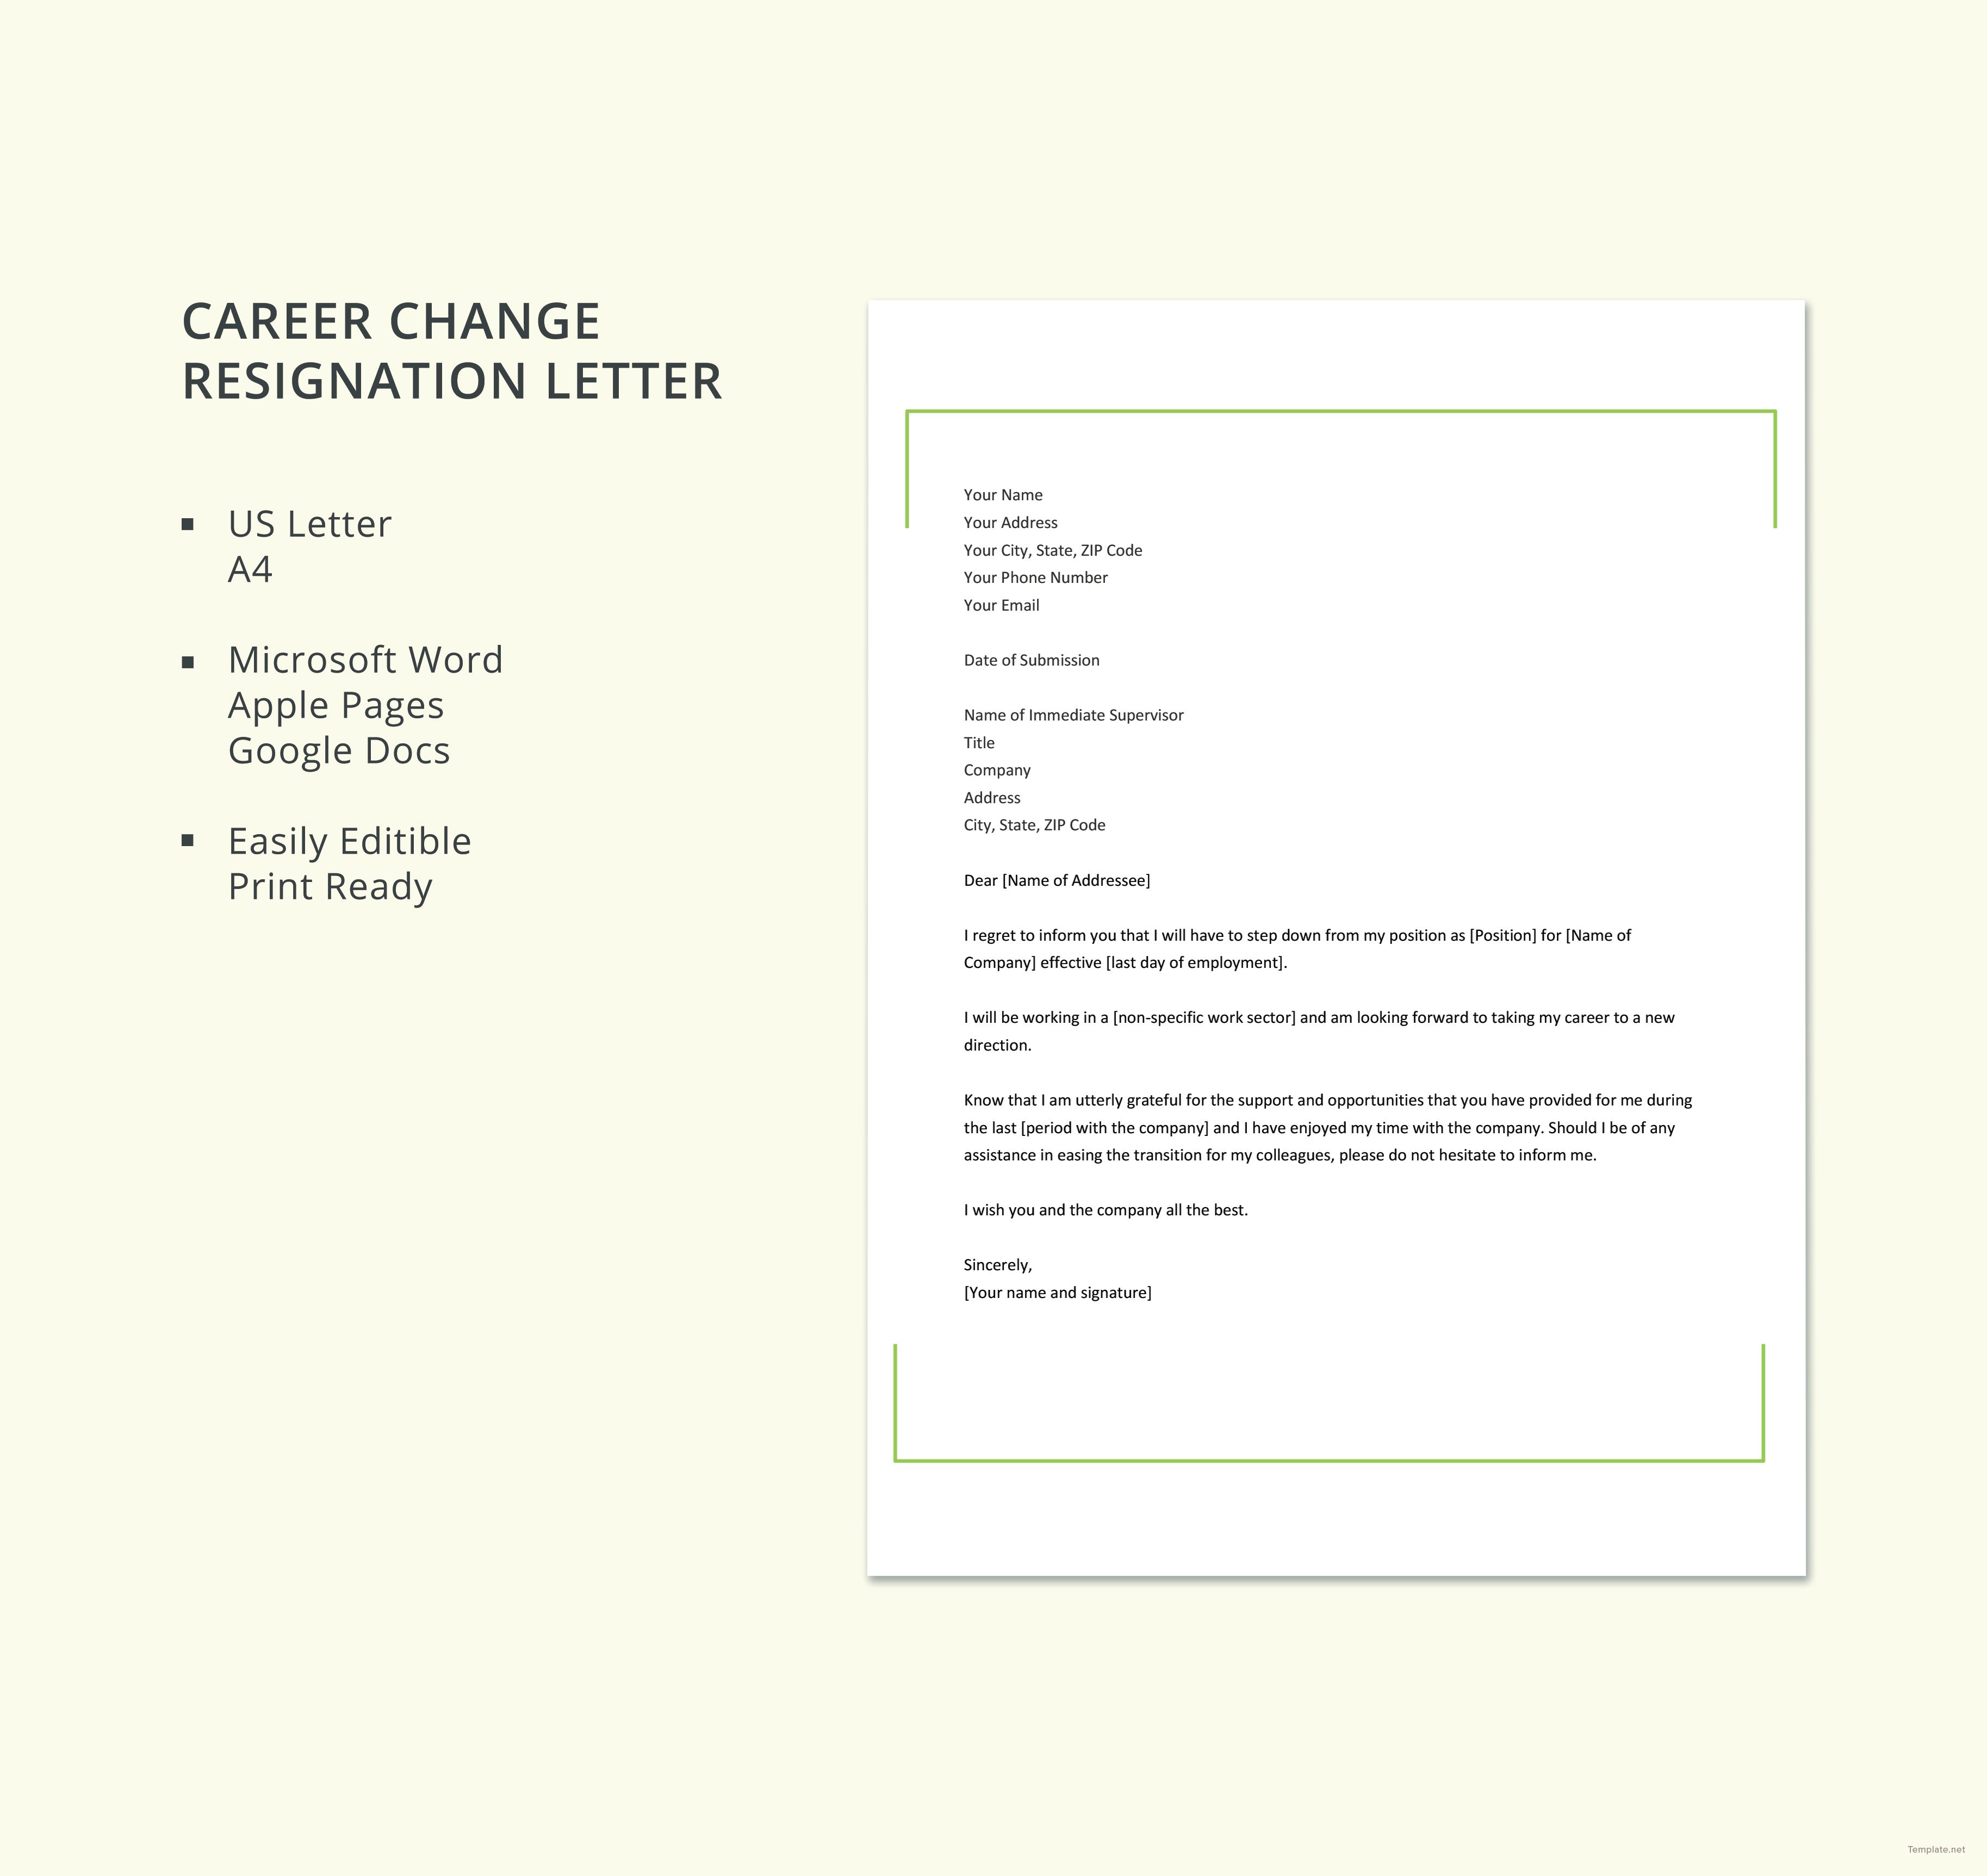 Free Career Change Resignation Letter Template in